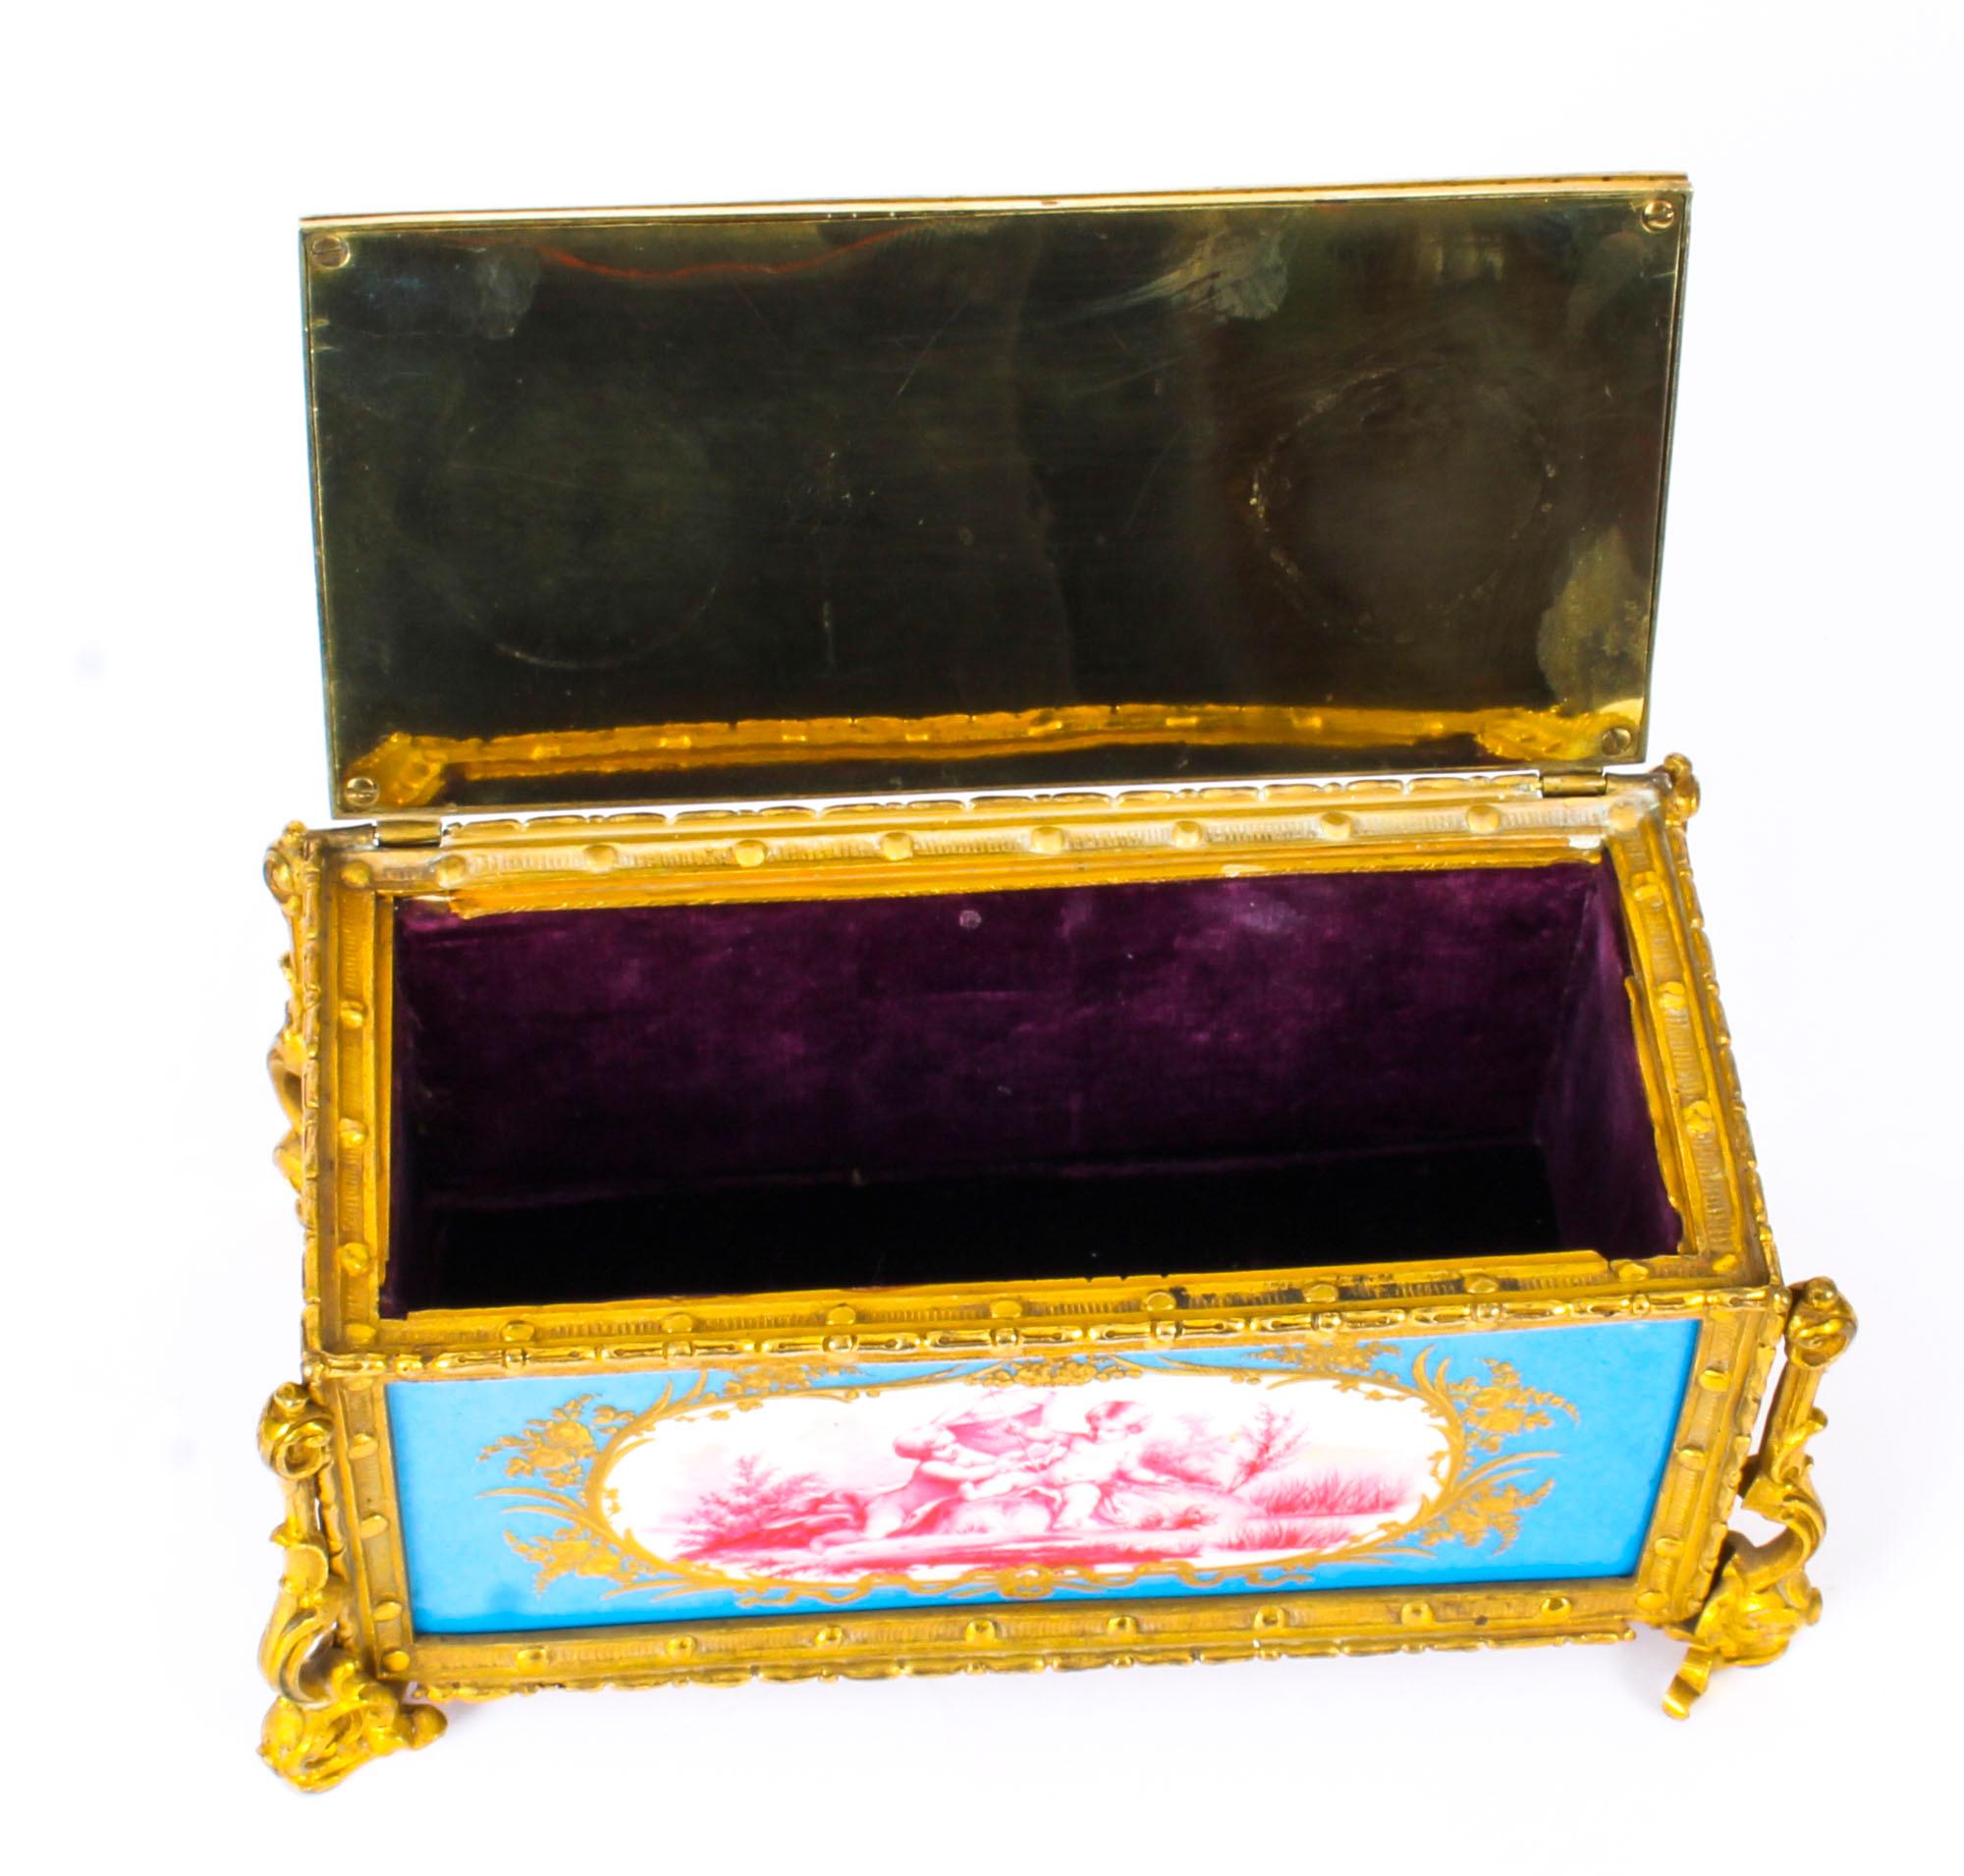 Antique French Sevres Porcelain and Ormolu Jewelry Casket, 19th Century For Sale 5